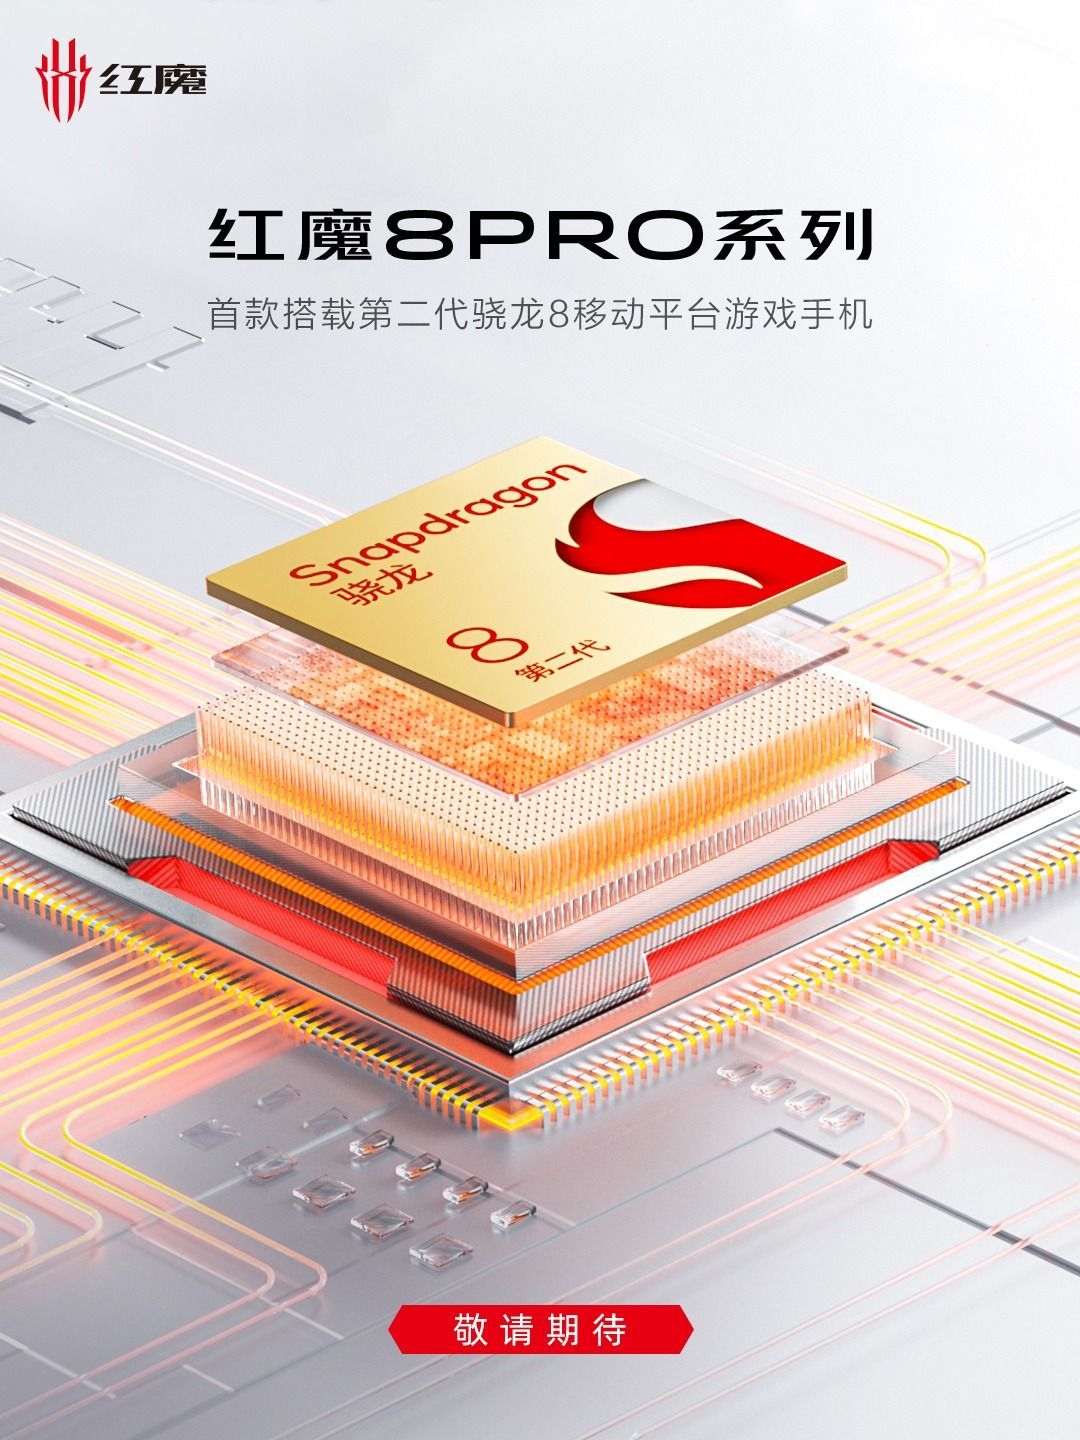 Red-Magic-8-Pro-Snapdragon-8-Gen-2-announcement-poster